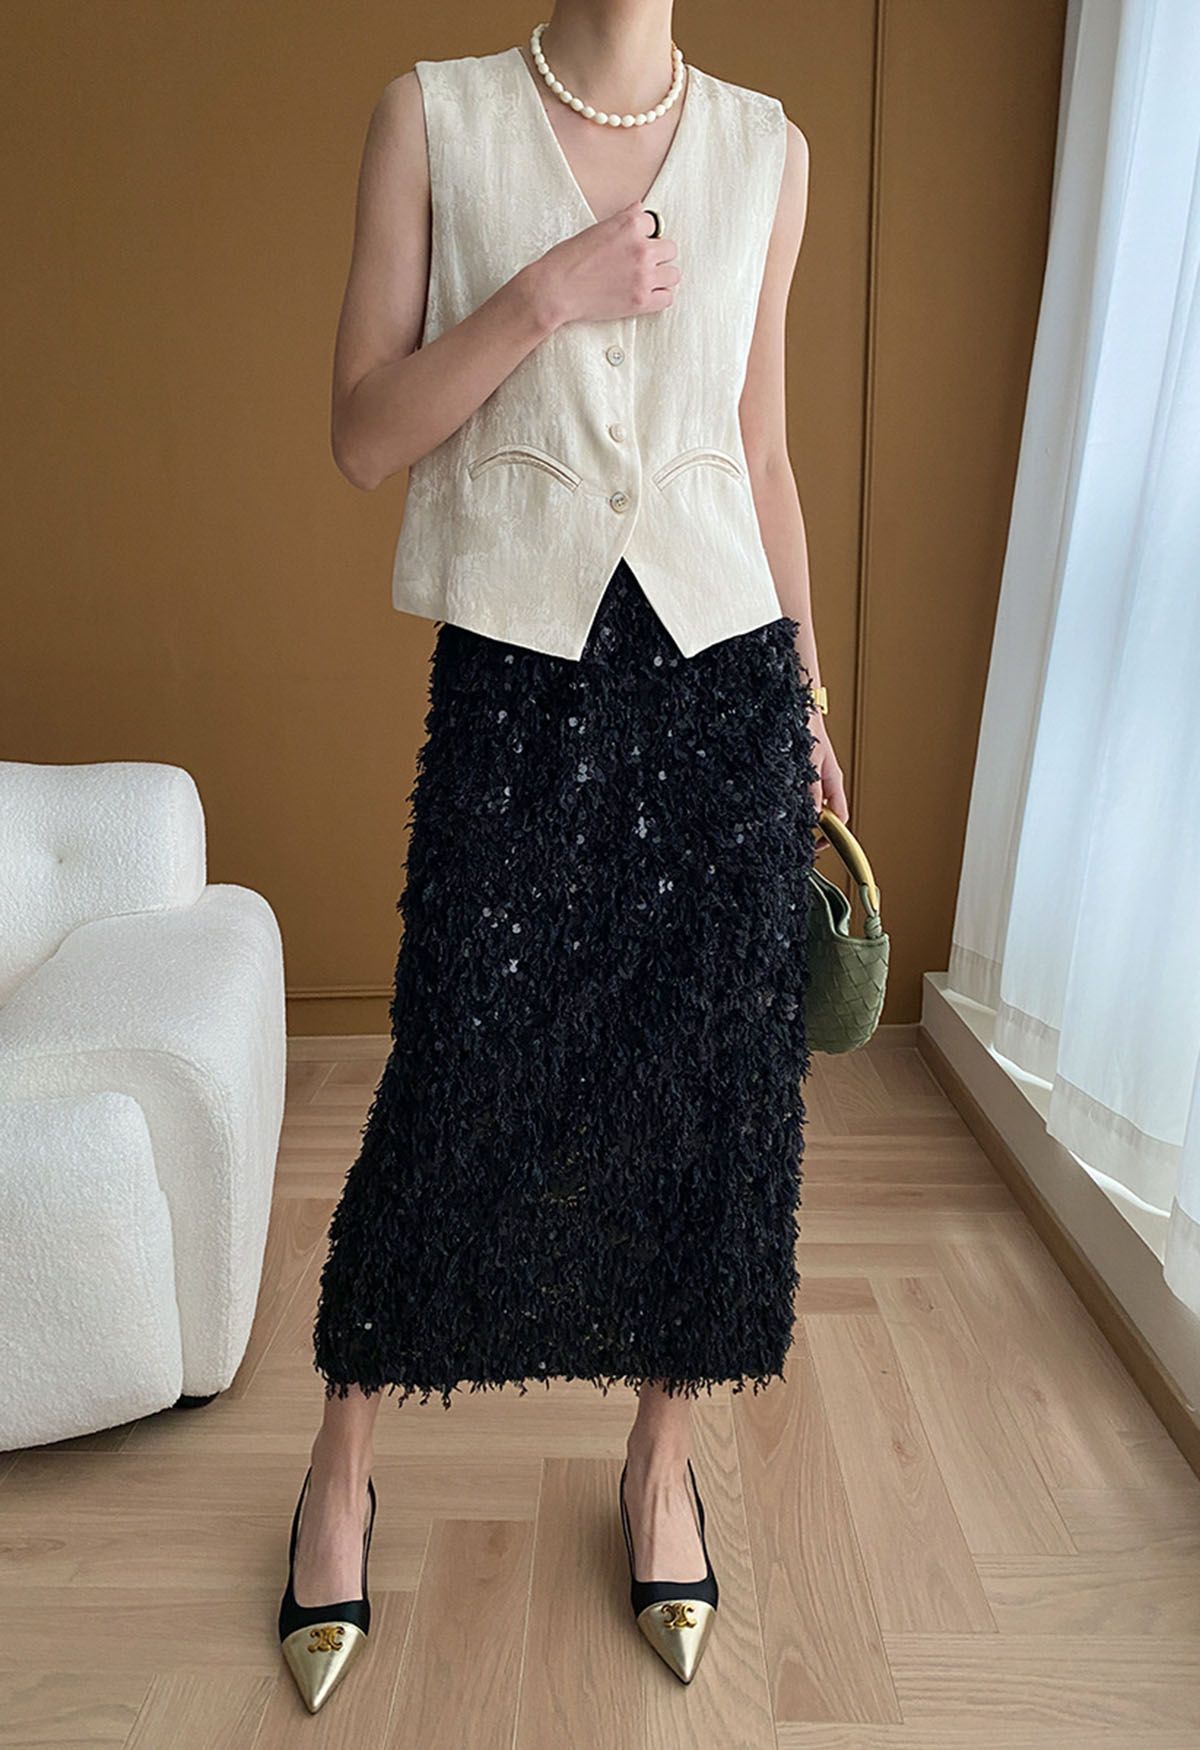 Full Feather Sequined Pencil Skirt in Black